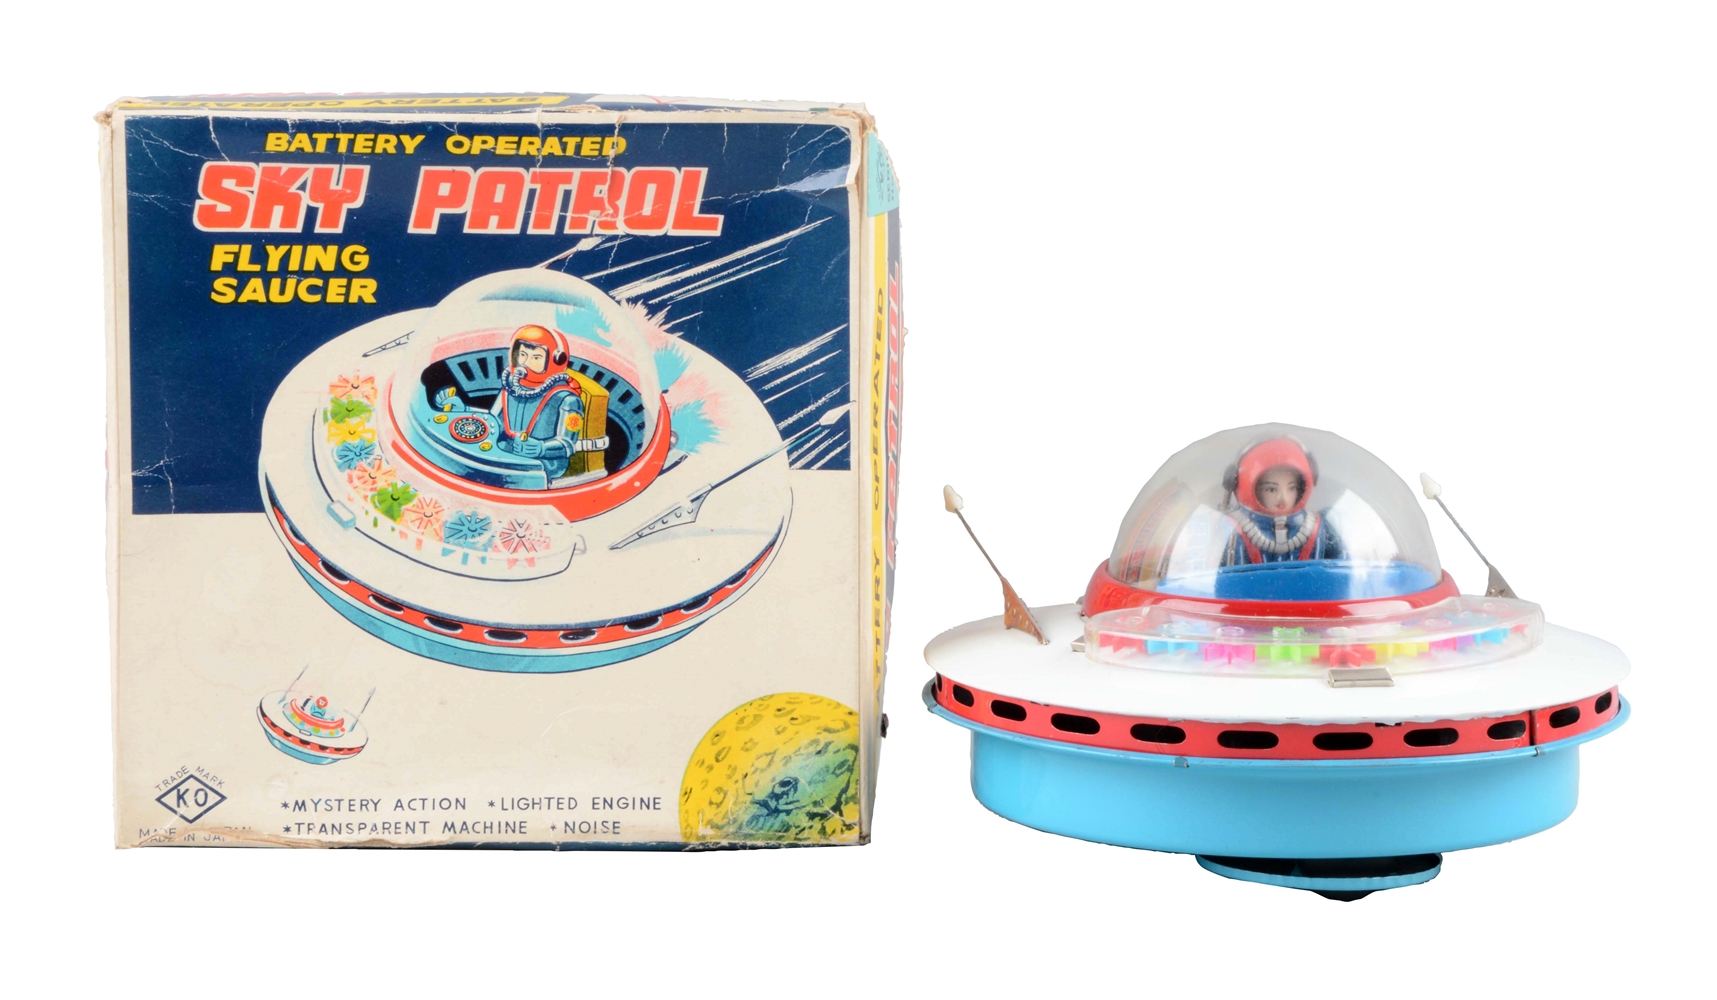 JAPANESE TIN LITHO BATTERY-OPERATED SKY PATROL FLYING SAUCER.